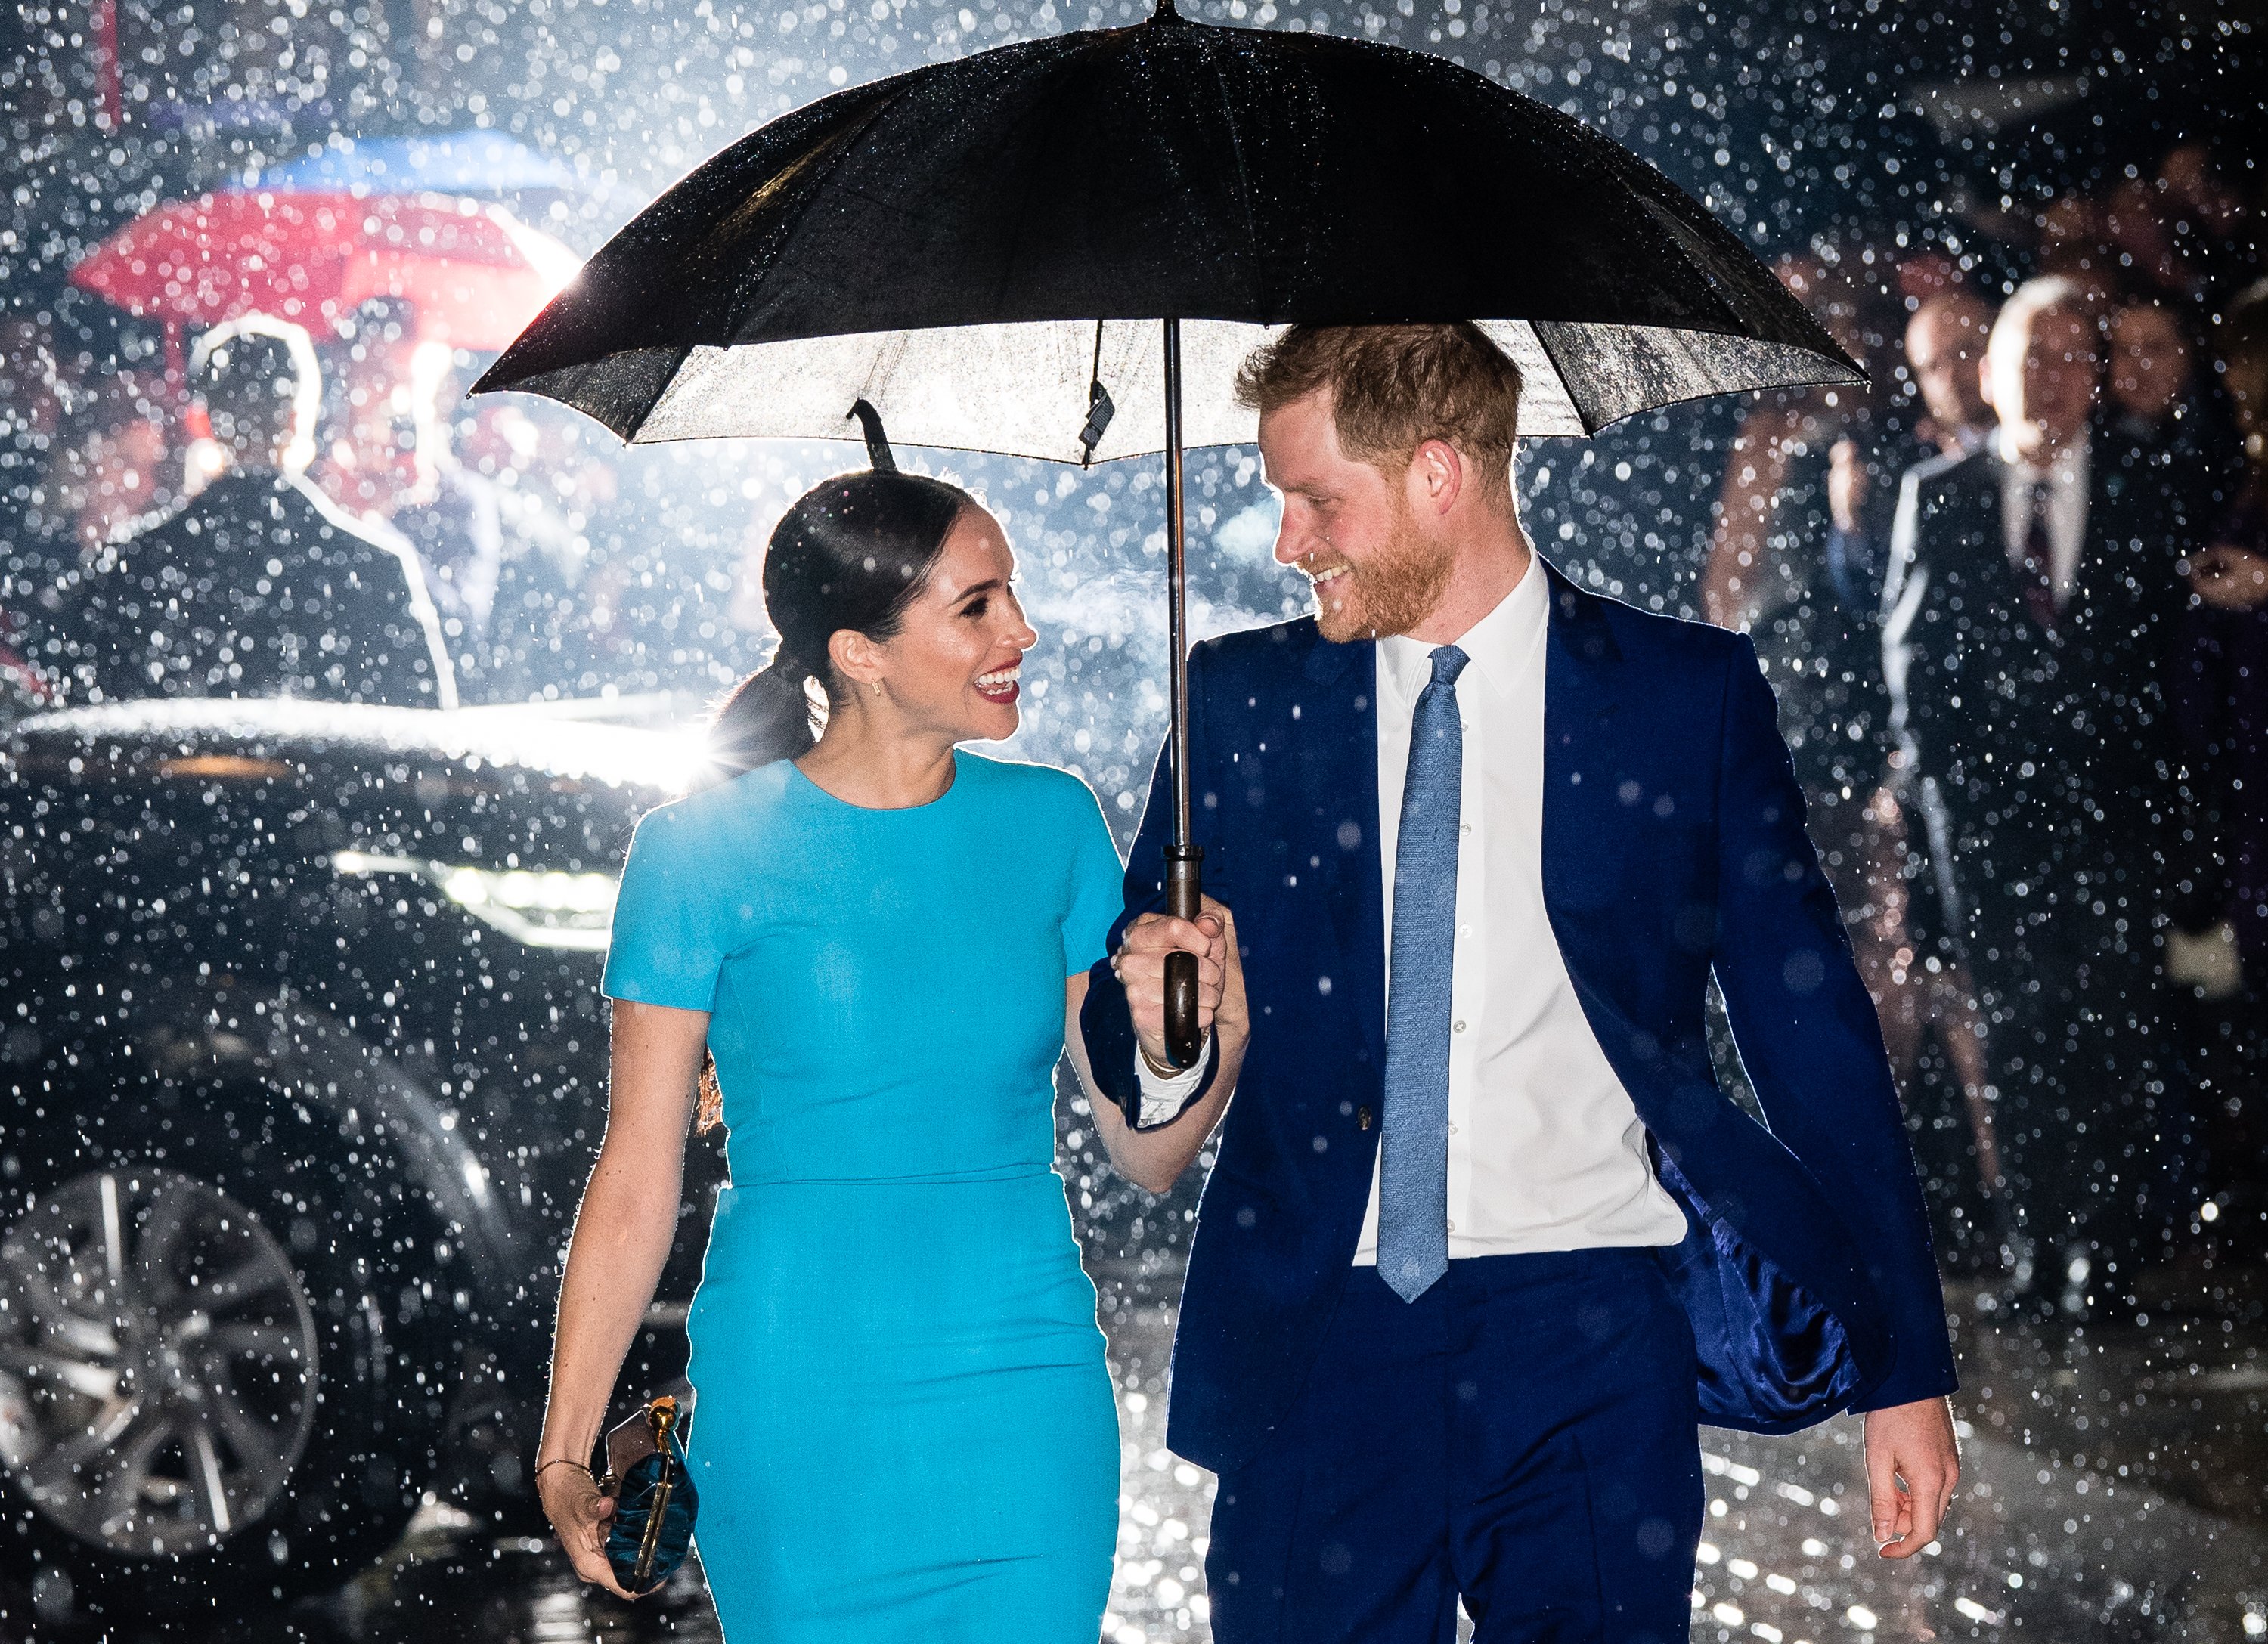 Prince Harry, Duke of Sussex and Meghan, Duchess of Sussex during The Endeavour Fund Awards at Mansion House on March 05, 2020 in London, England. | Source: Getty Images